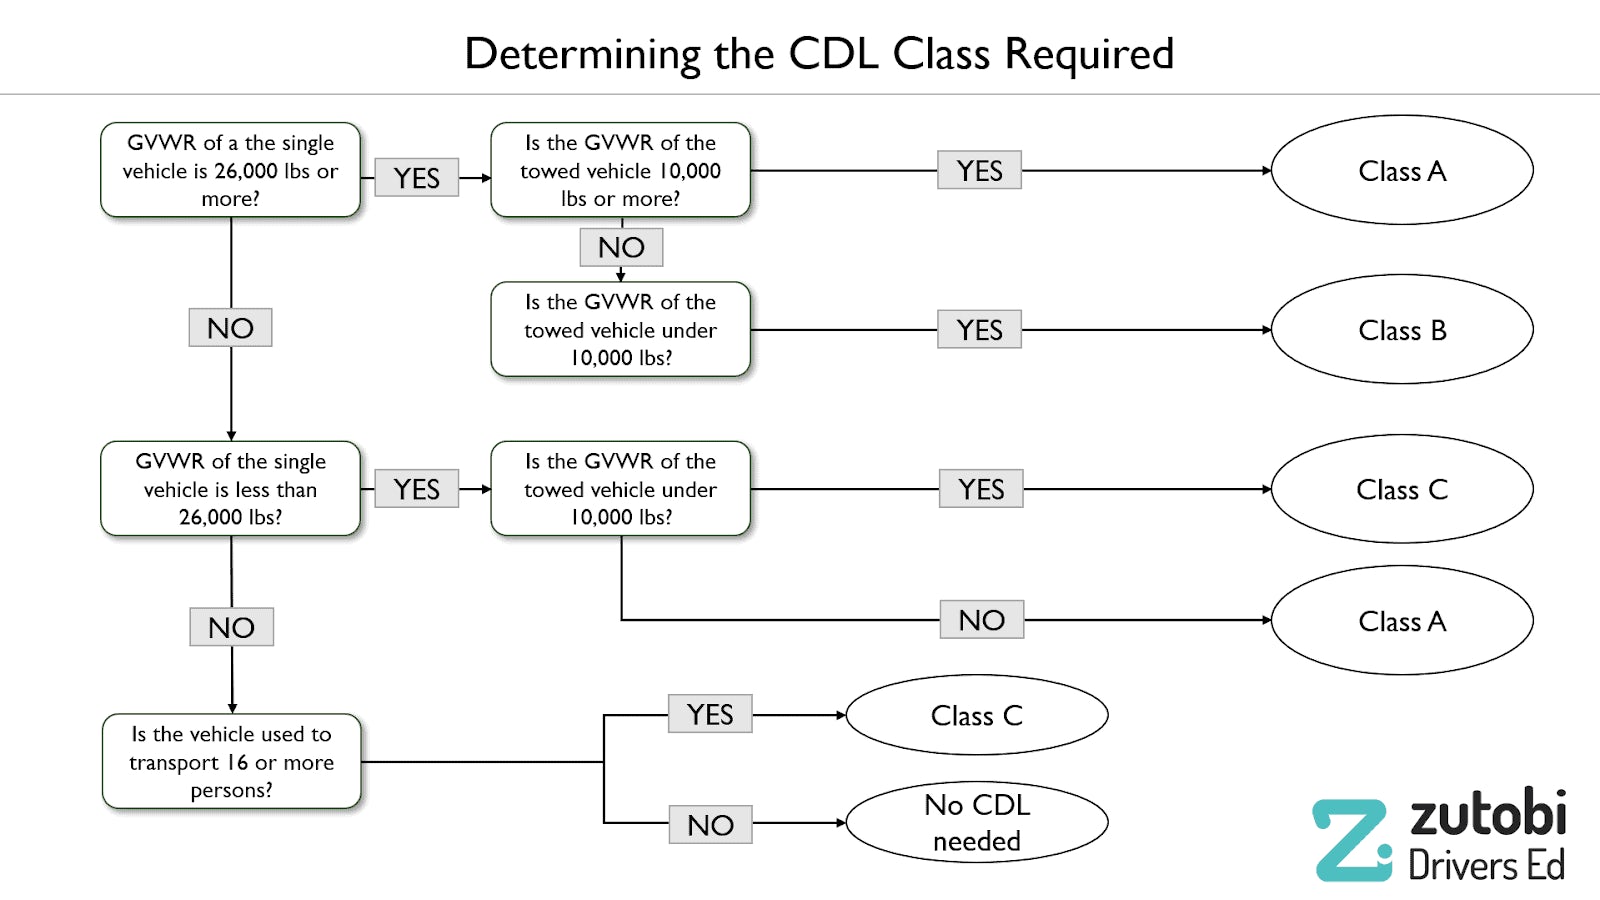 An illustration with questions to help you determine which type of CDL class you need